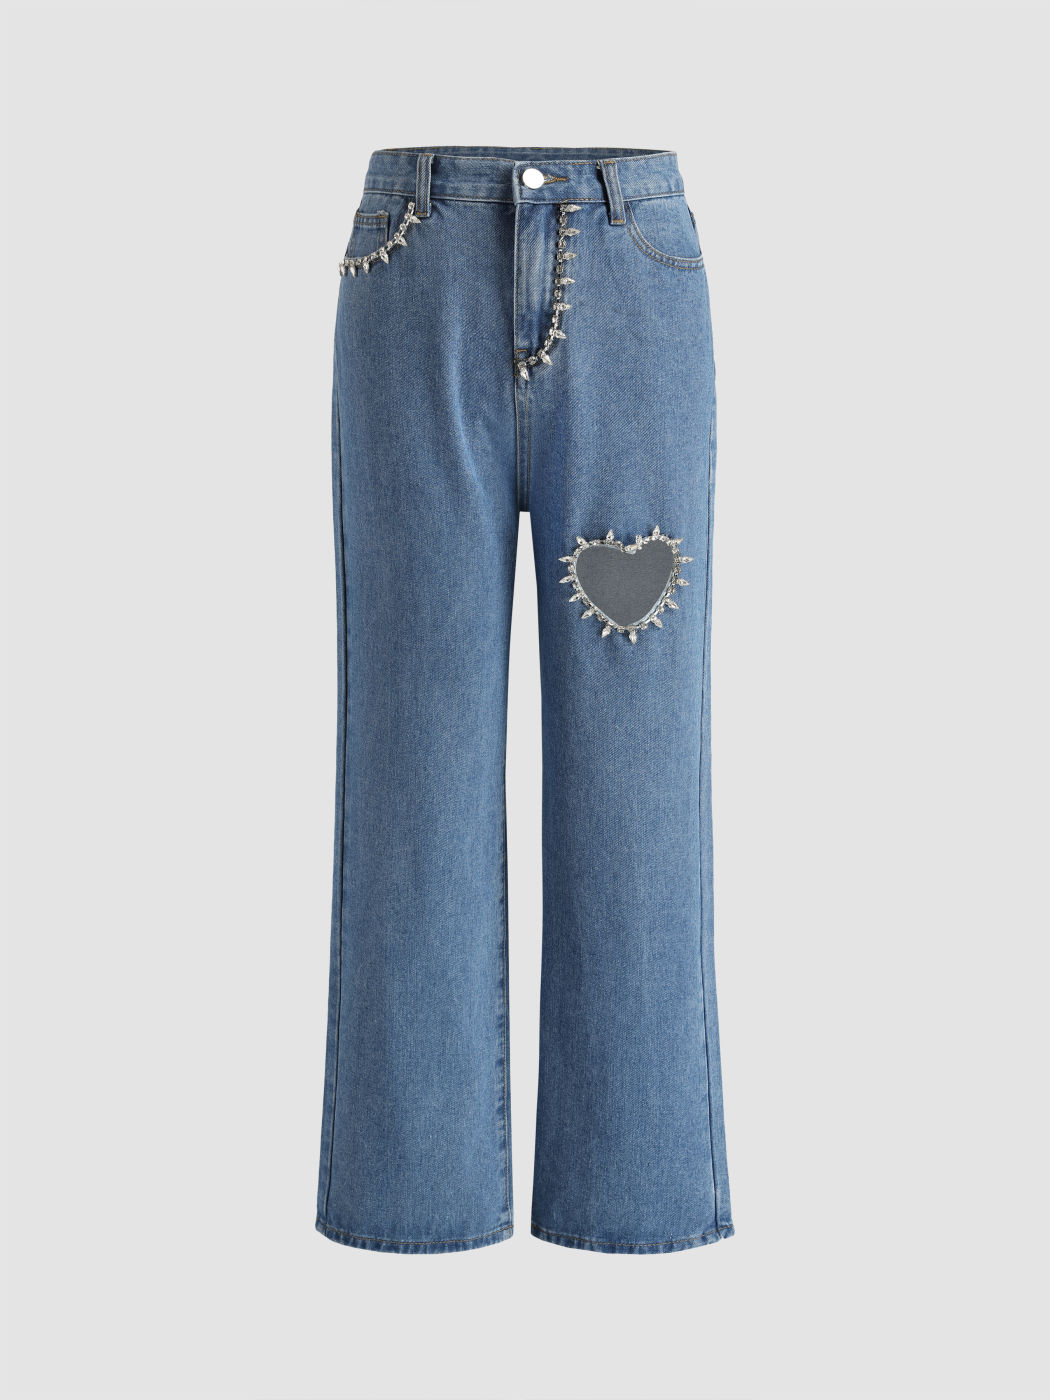 Heart Hollow Out Straight Leg Jeans - Cider